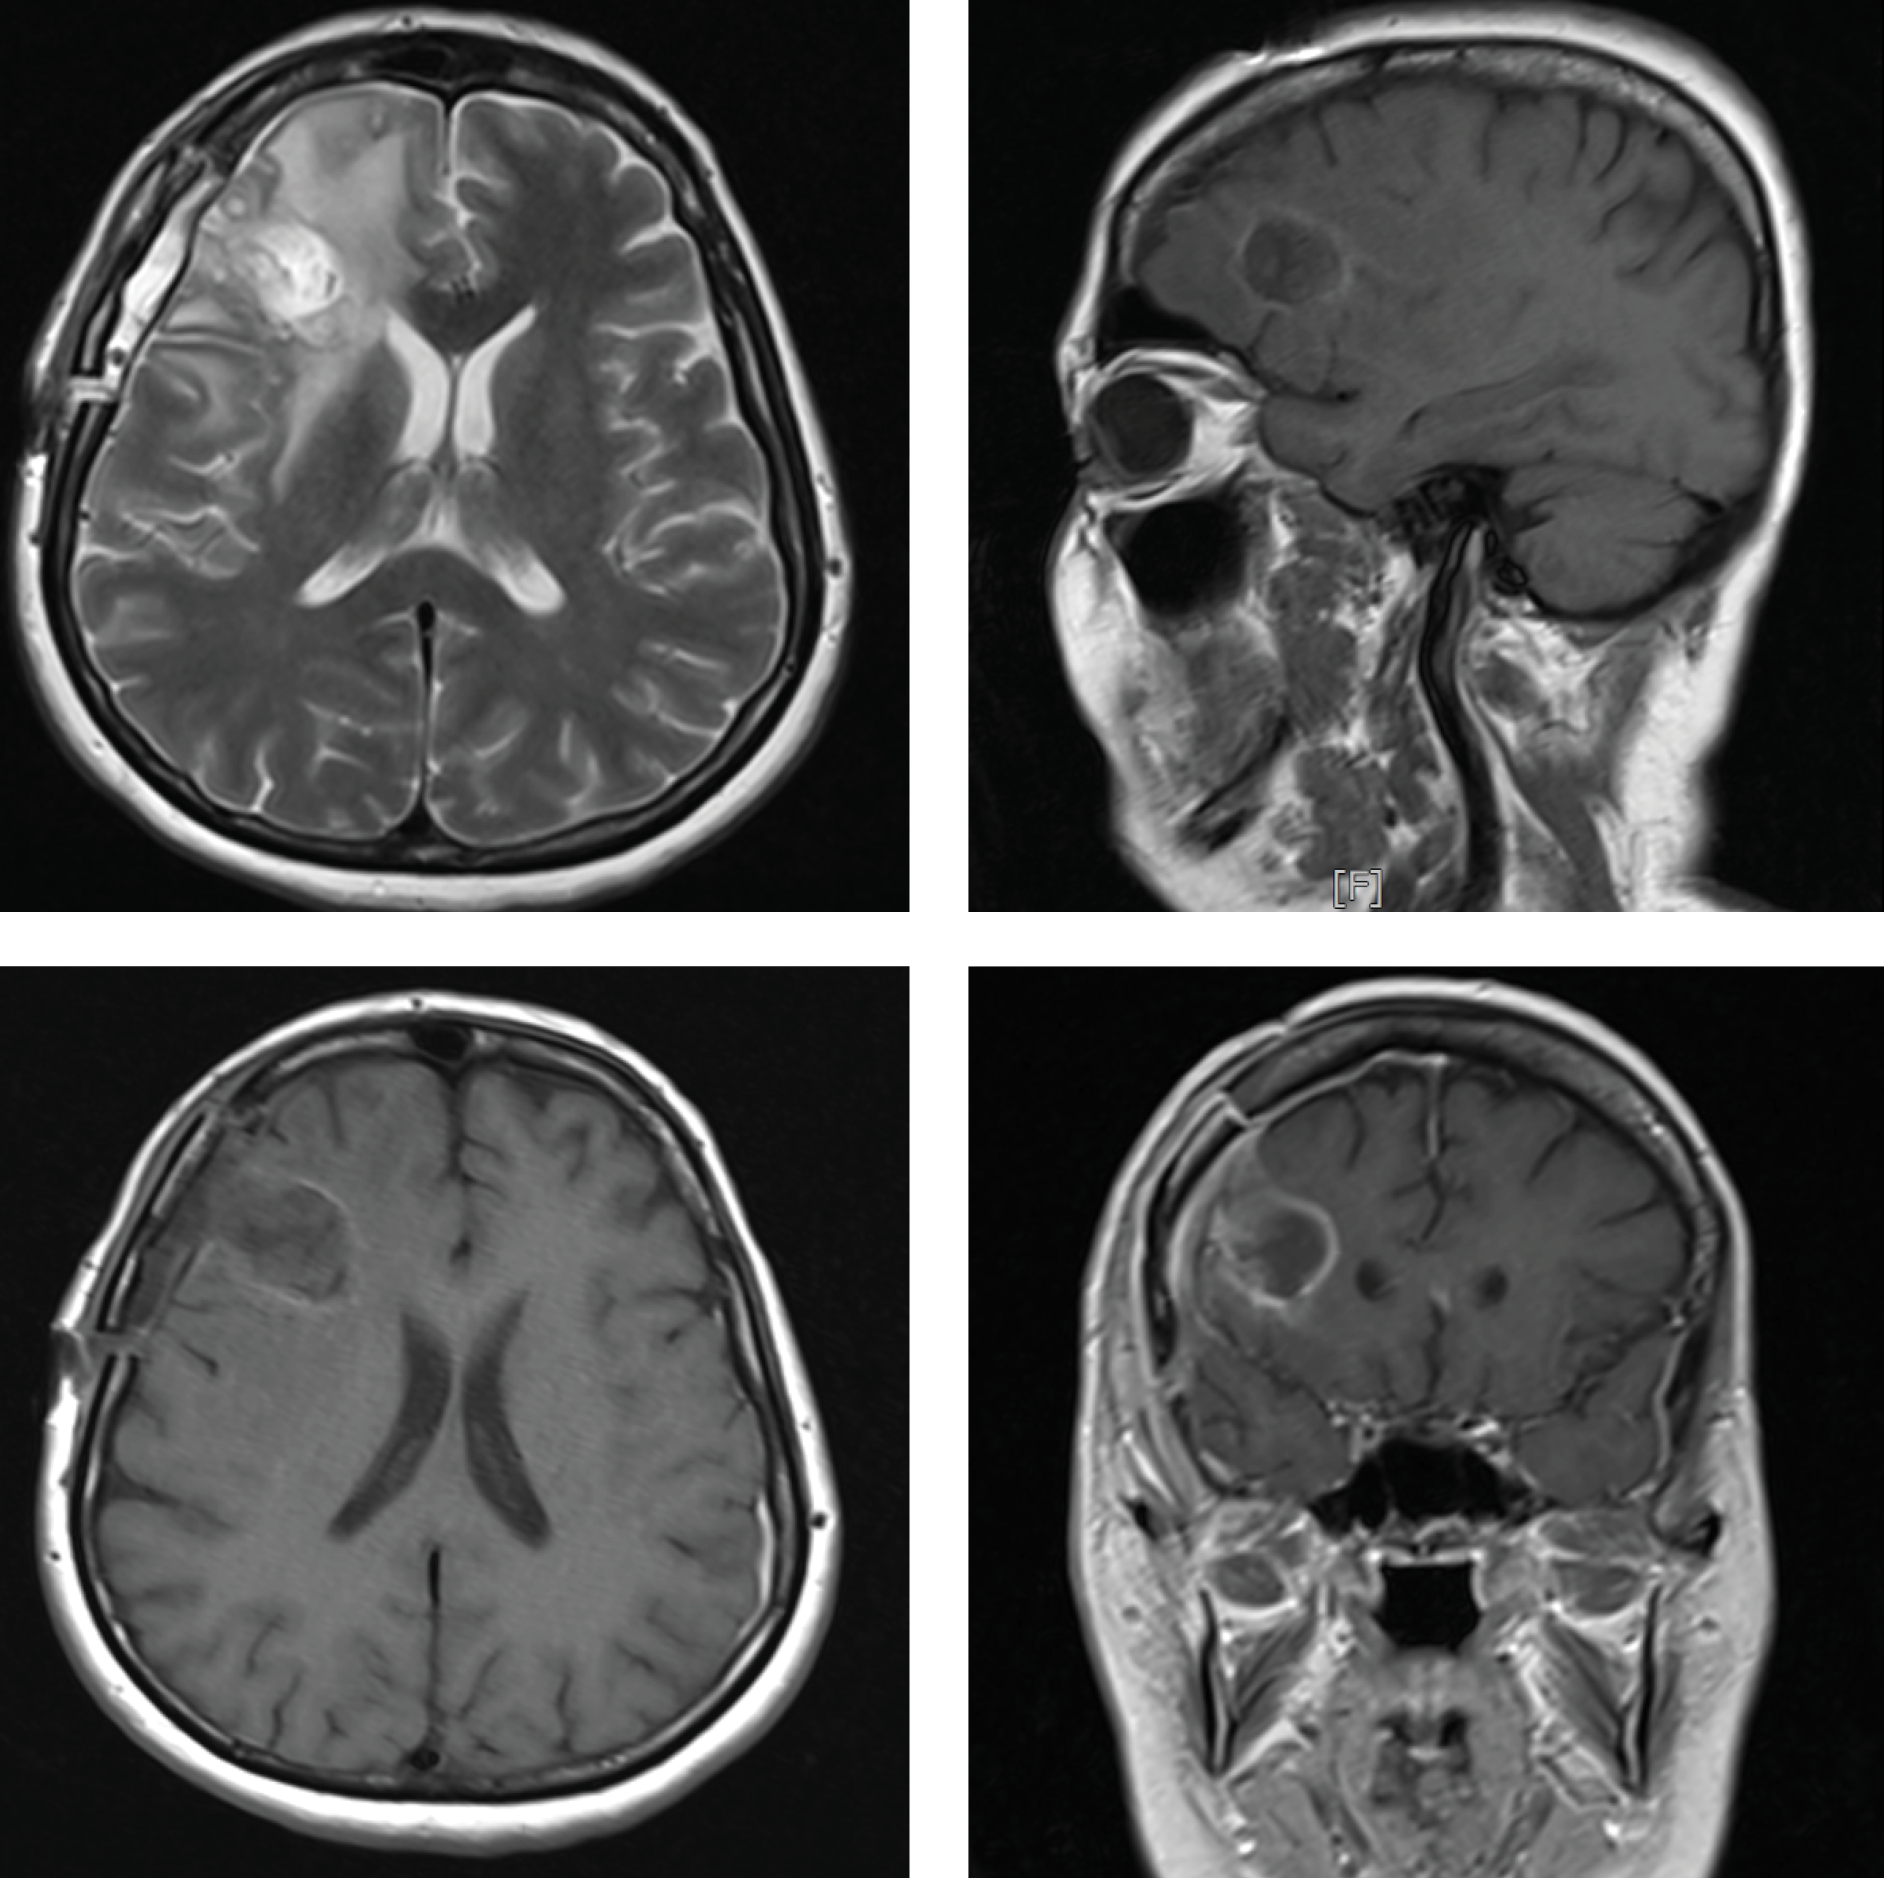 Recurrent Nocardial Brain Abscess Developing in an Immunocompetent Patient, A Case Report